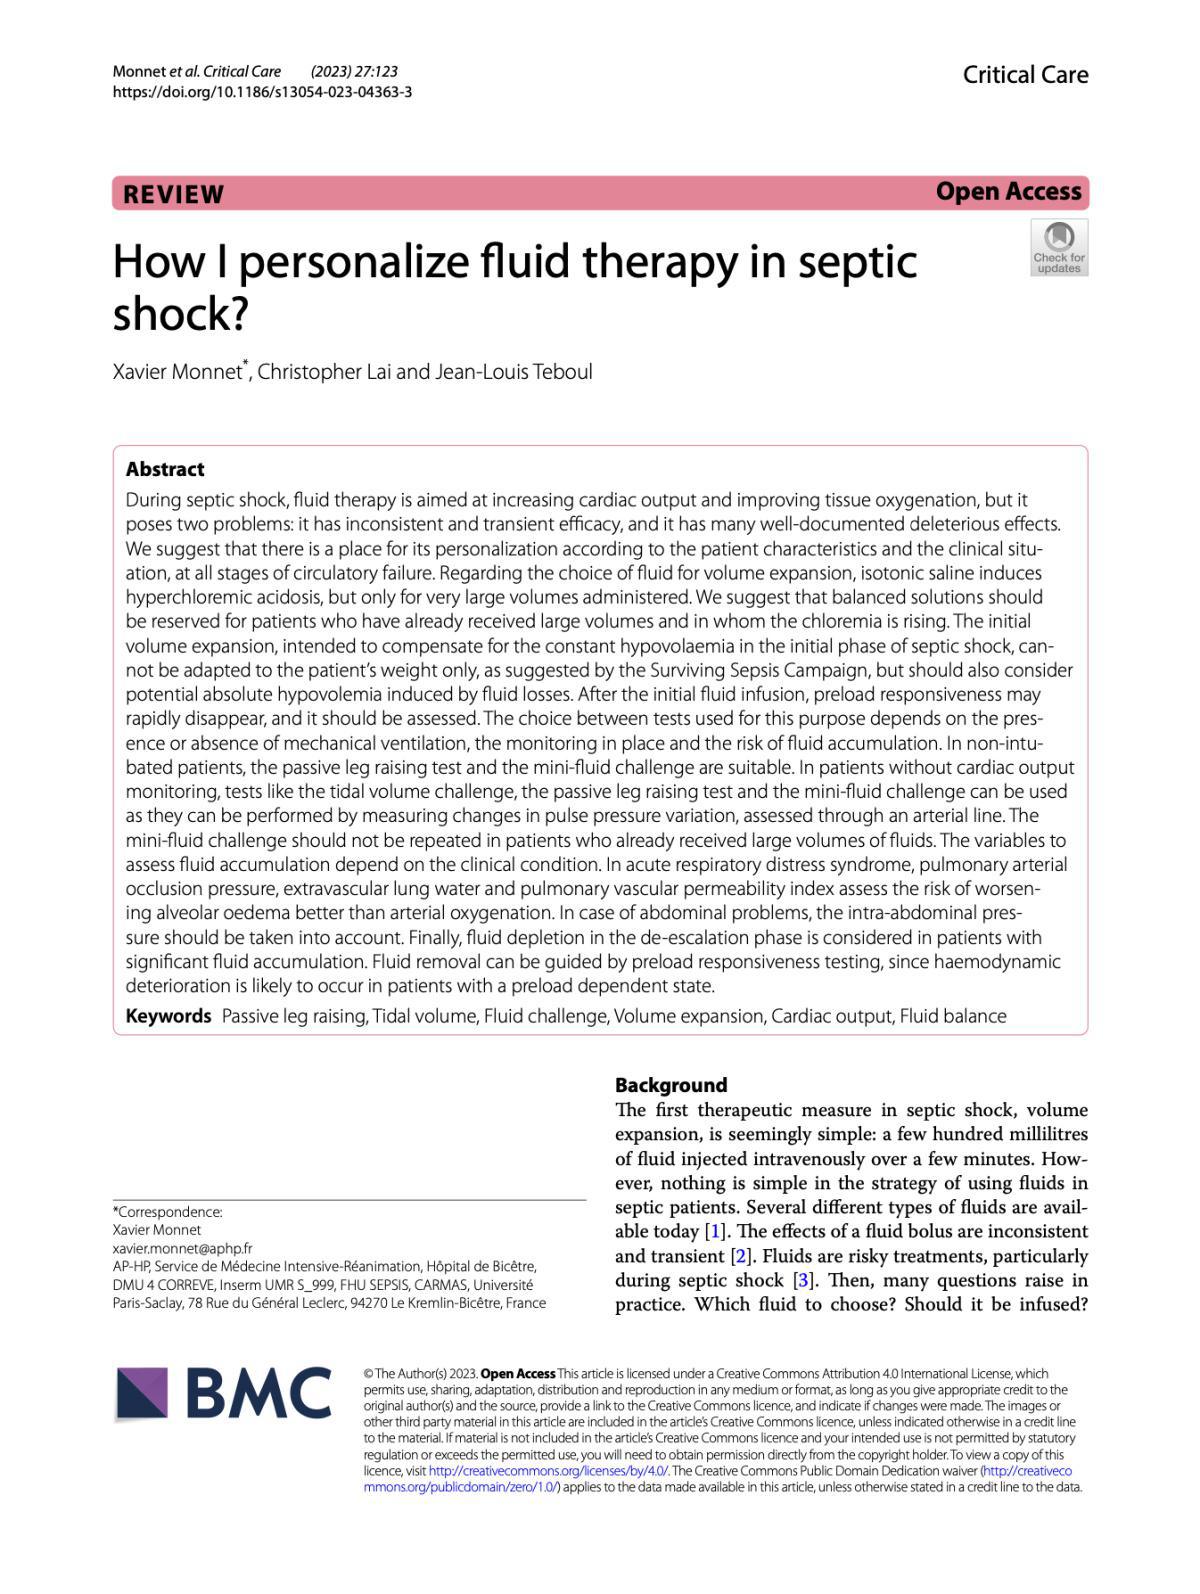 How I personalize fluid therapy in septic shock?